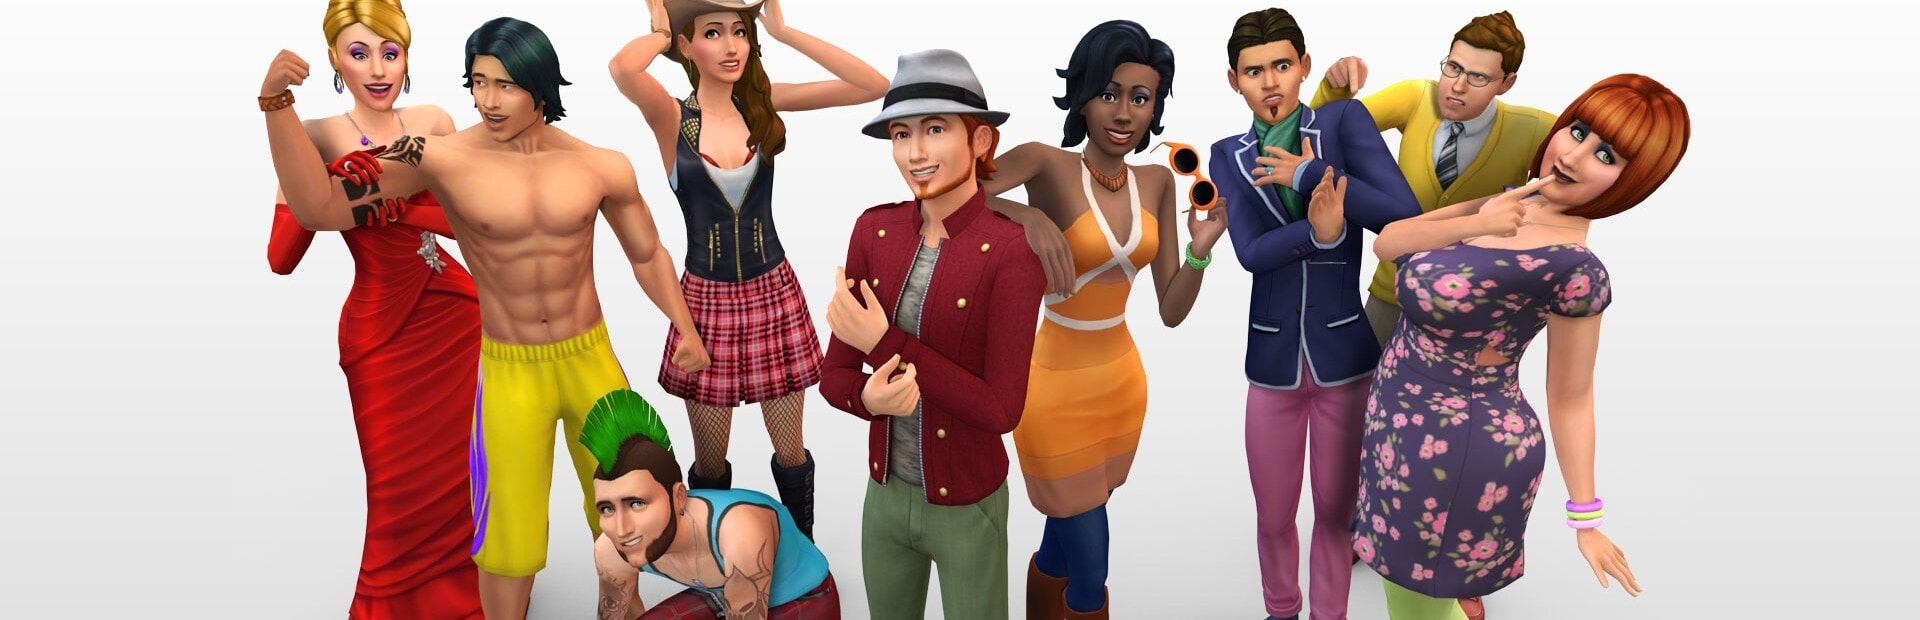 The Top 10 Best-Selling Expansion Packs for The Sims 4: Expanding Your Virtual Horizons